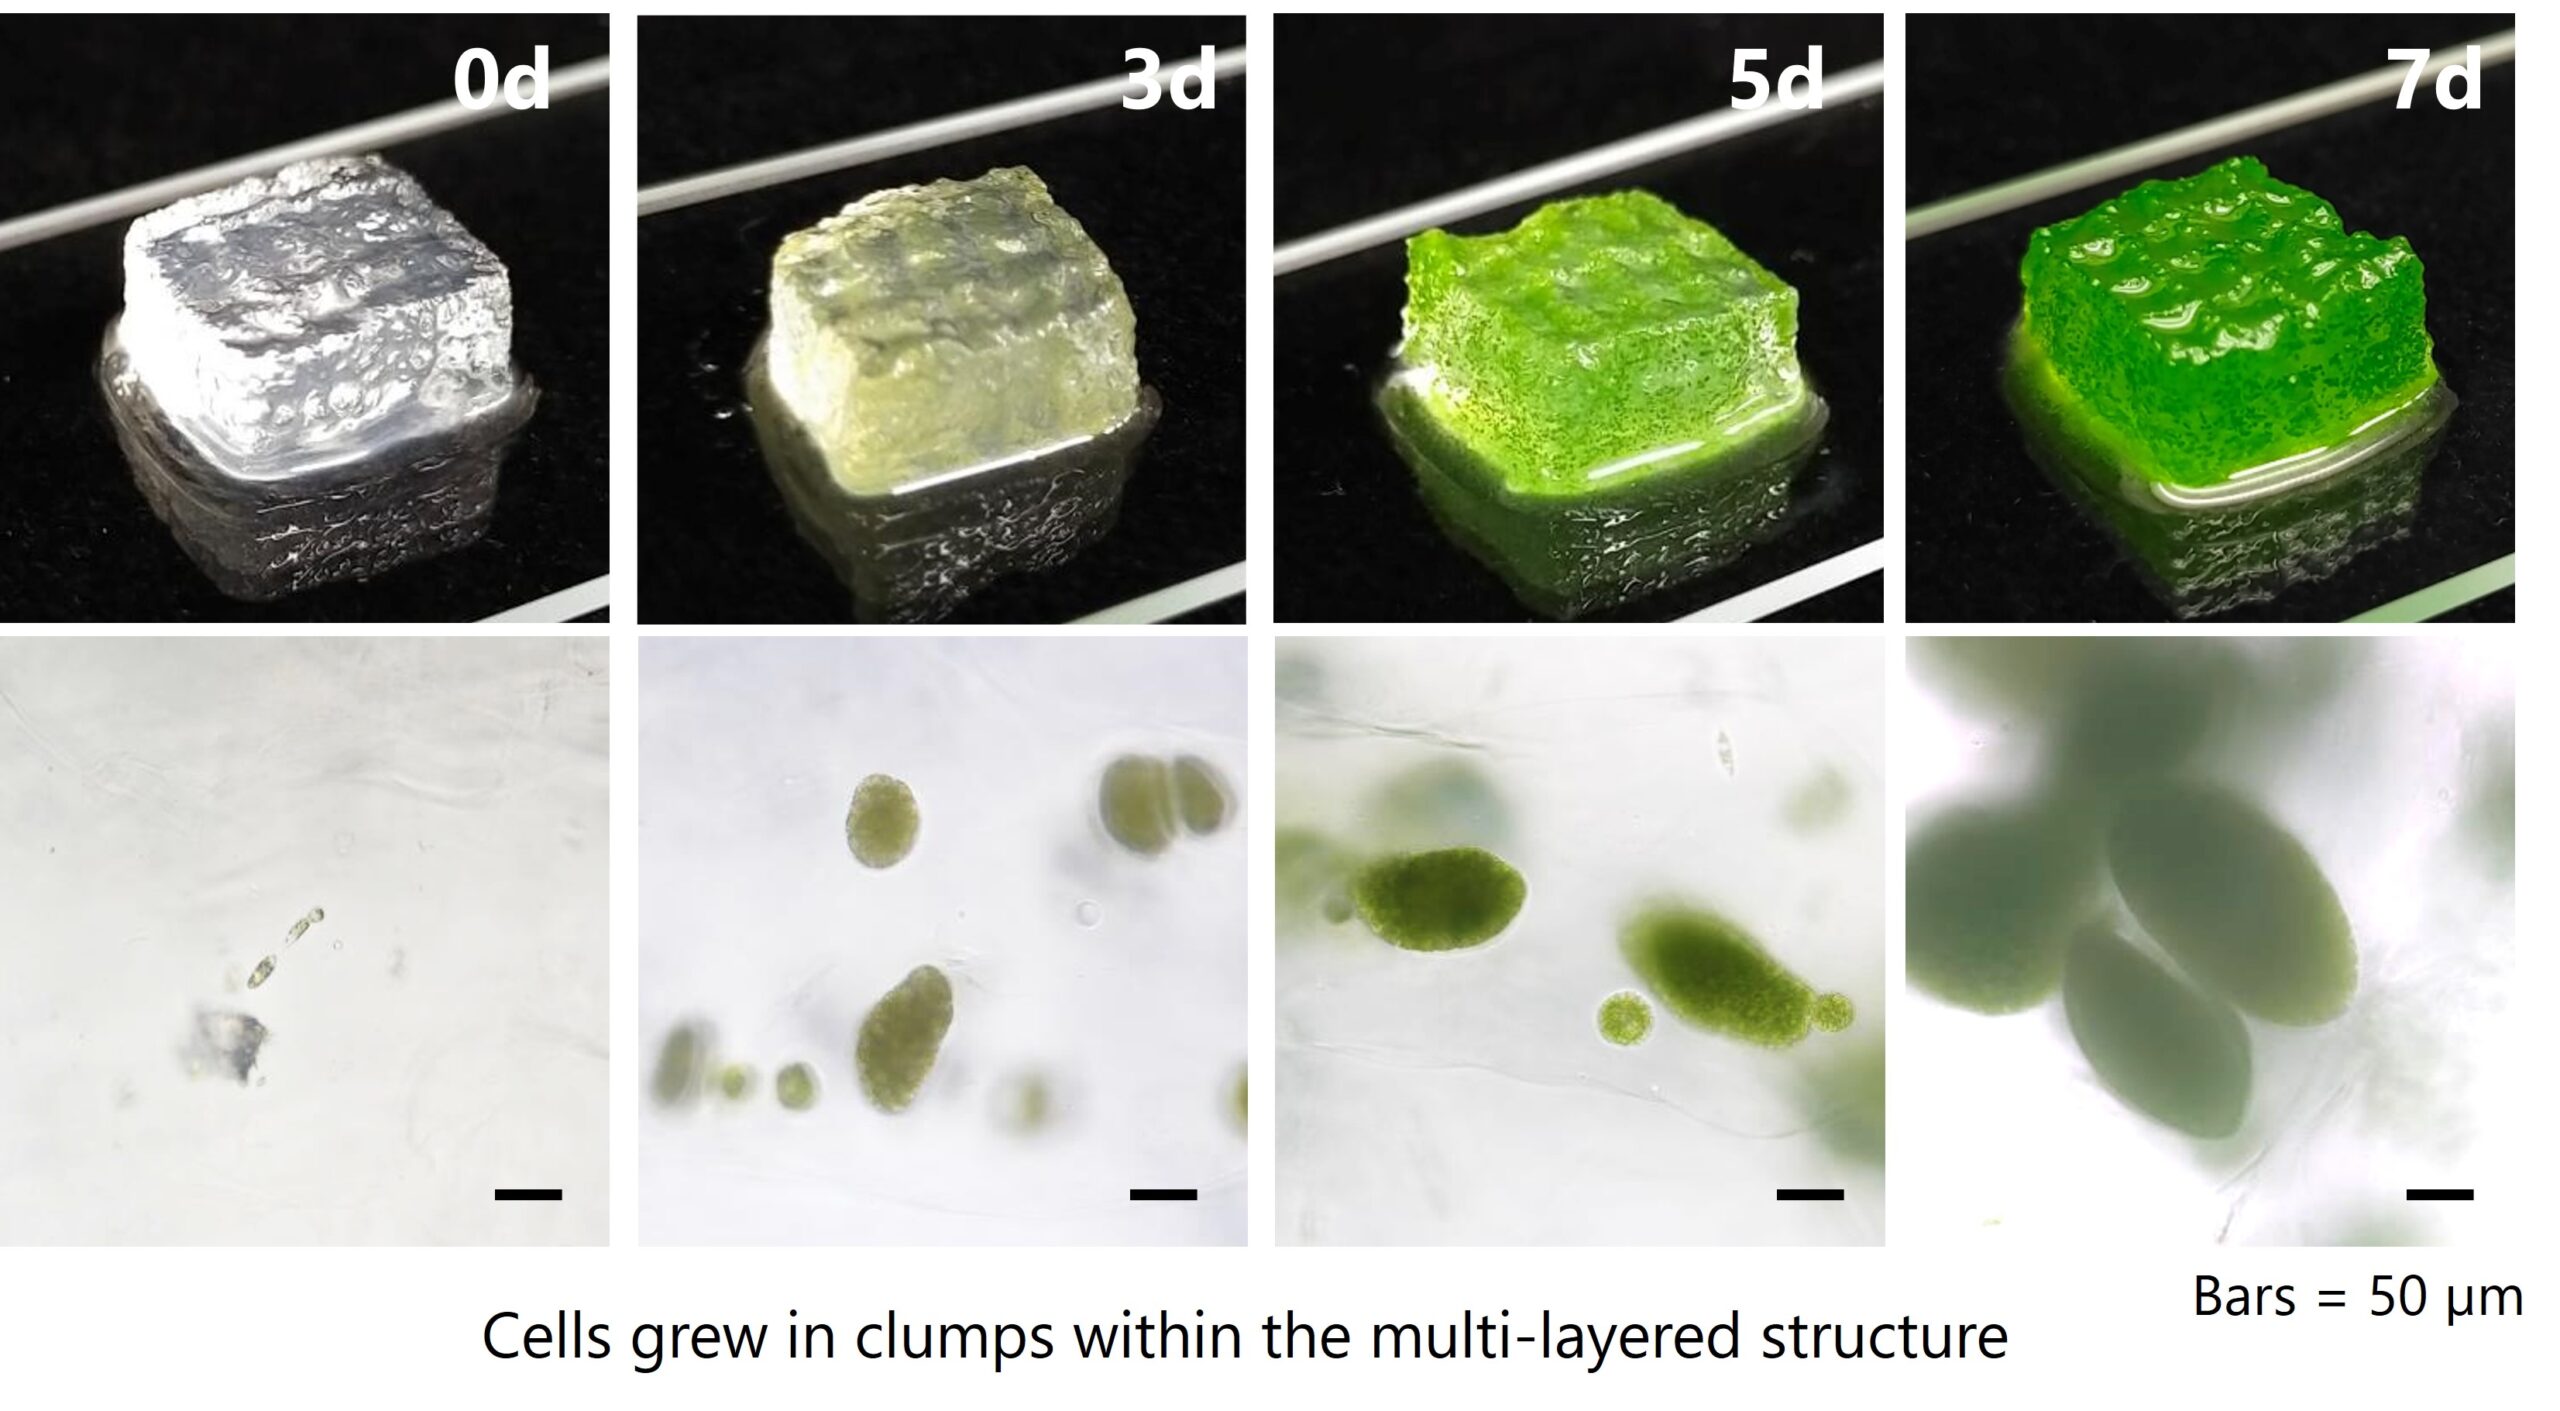 Cell growth of microalgae Euglena in a 3D bioprinted structure